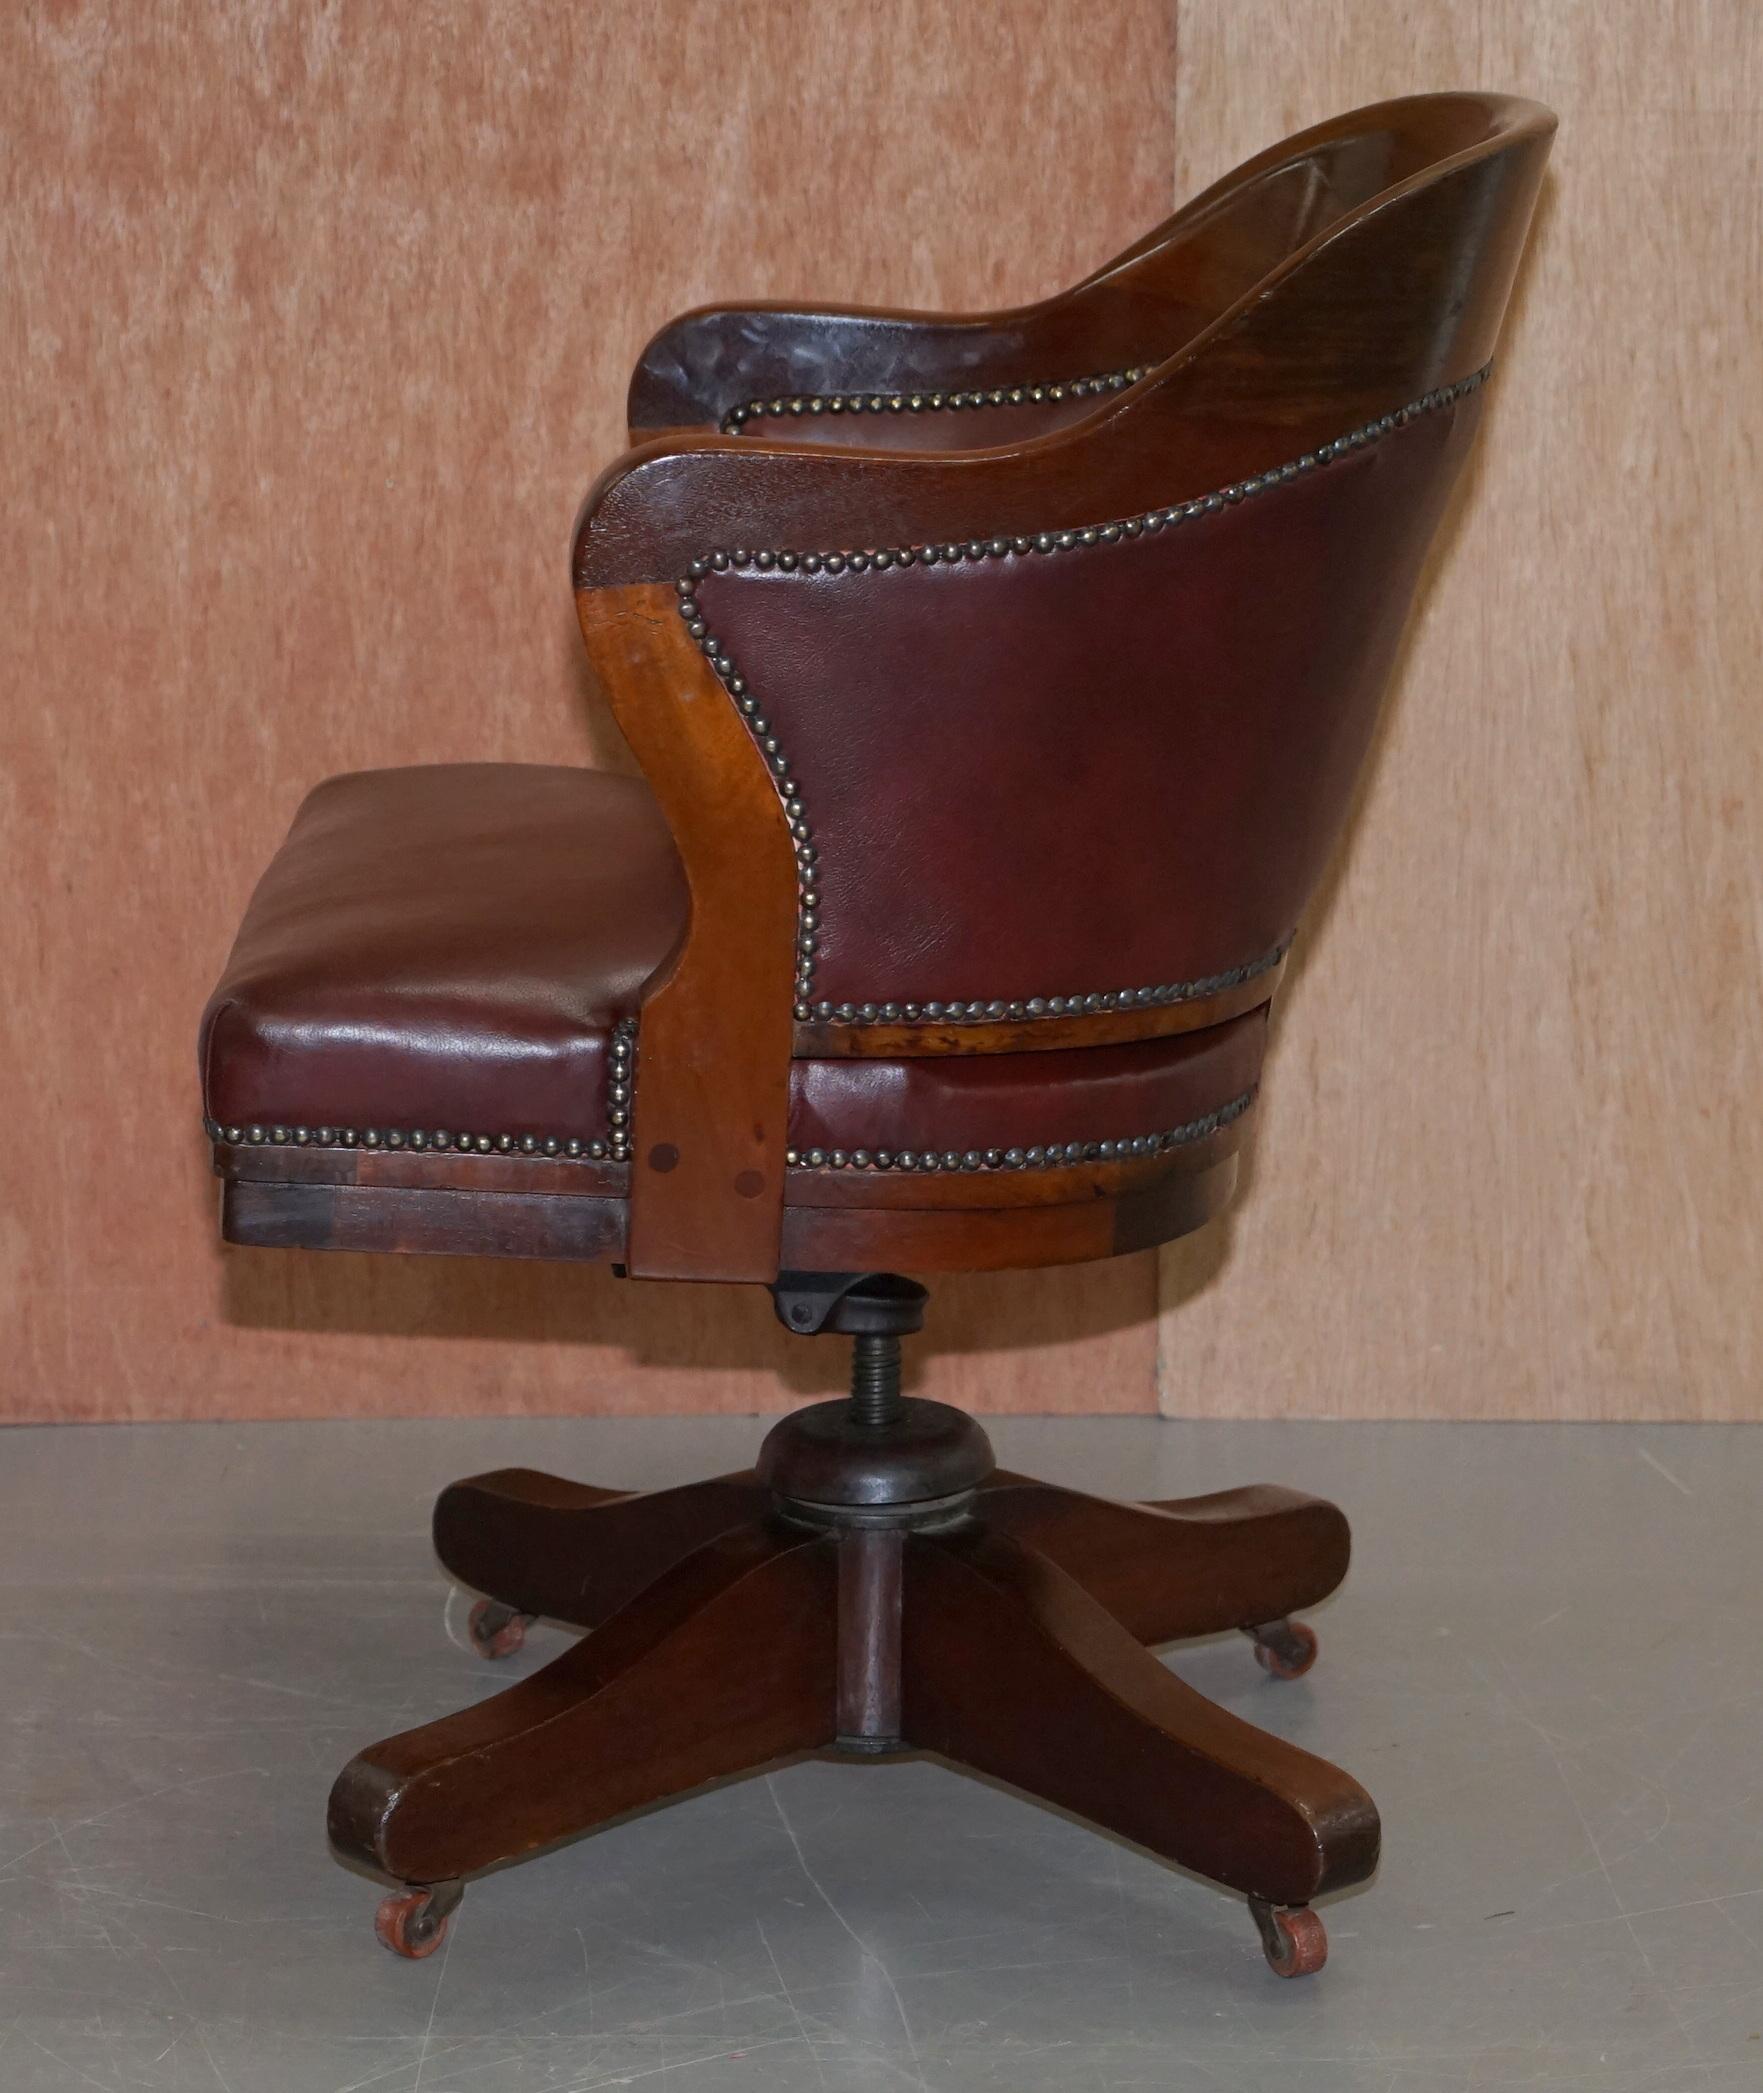 1900 Wylie & Lochhead by Appointment to the King Oxblood Leather Captains Chair 12